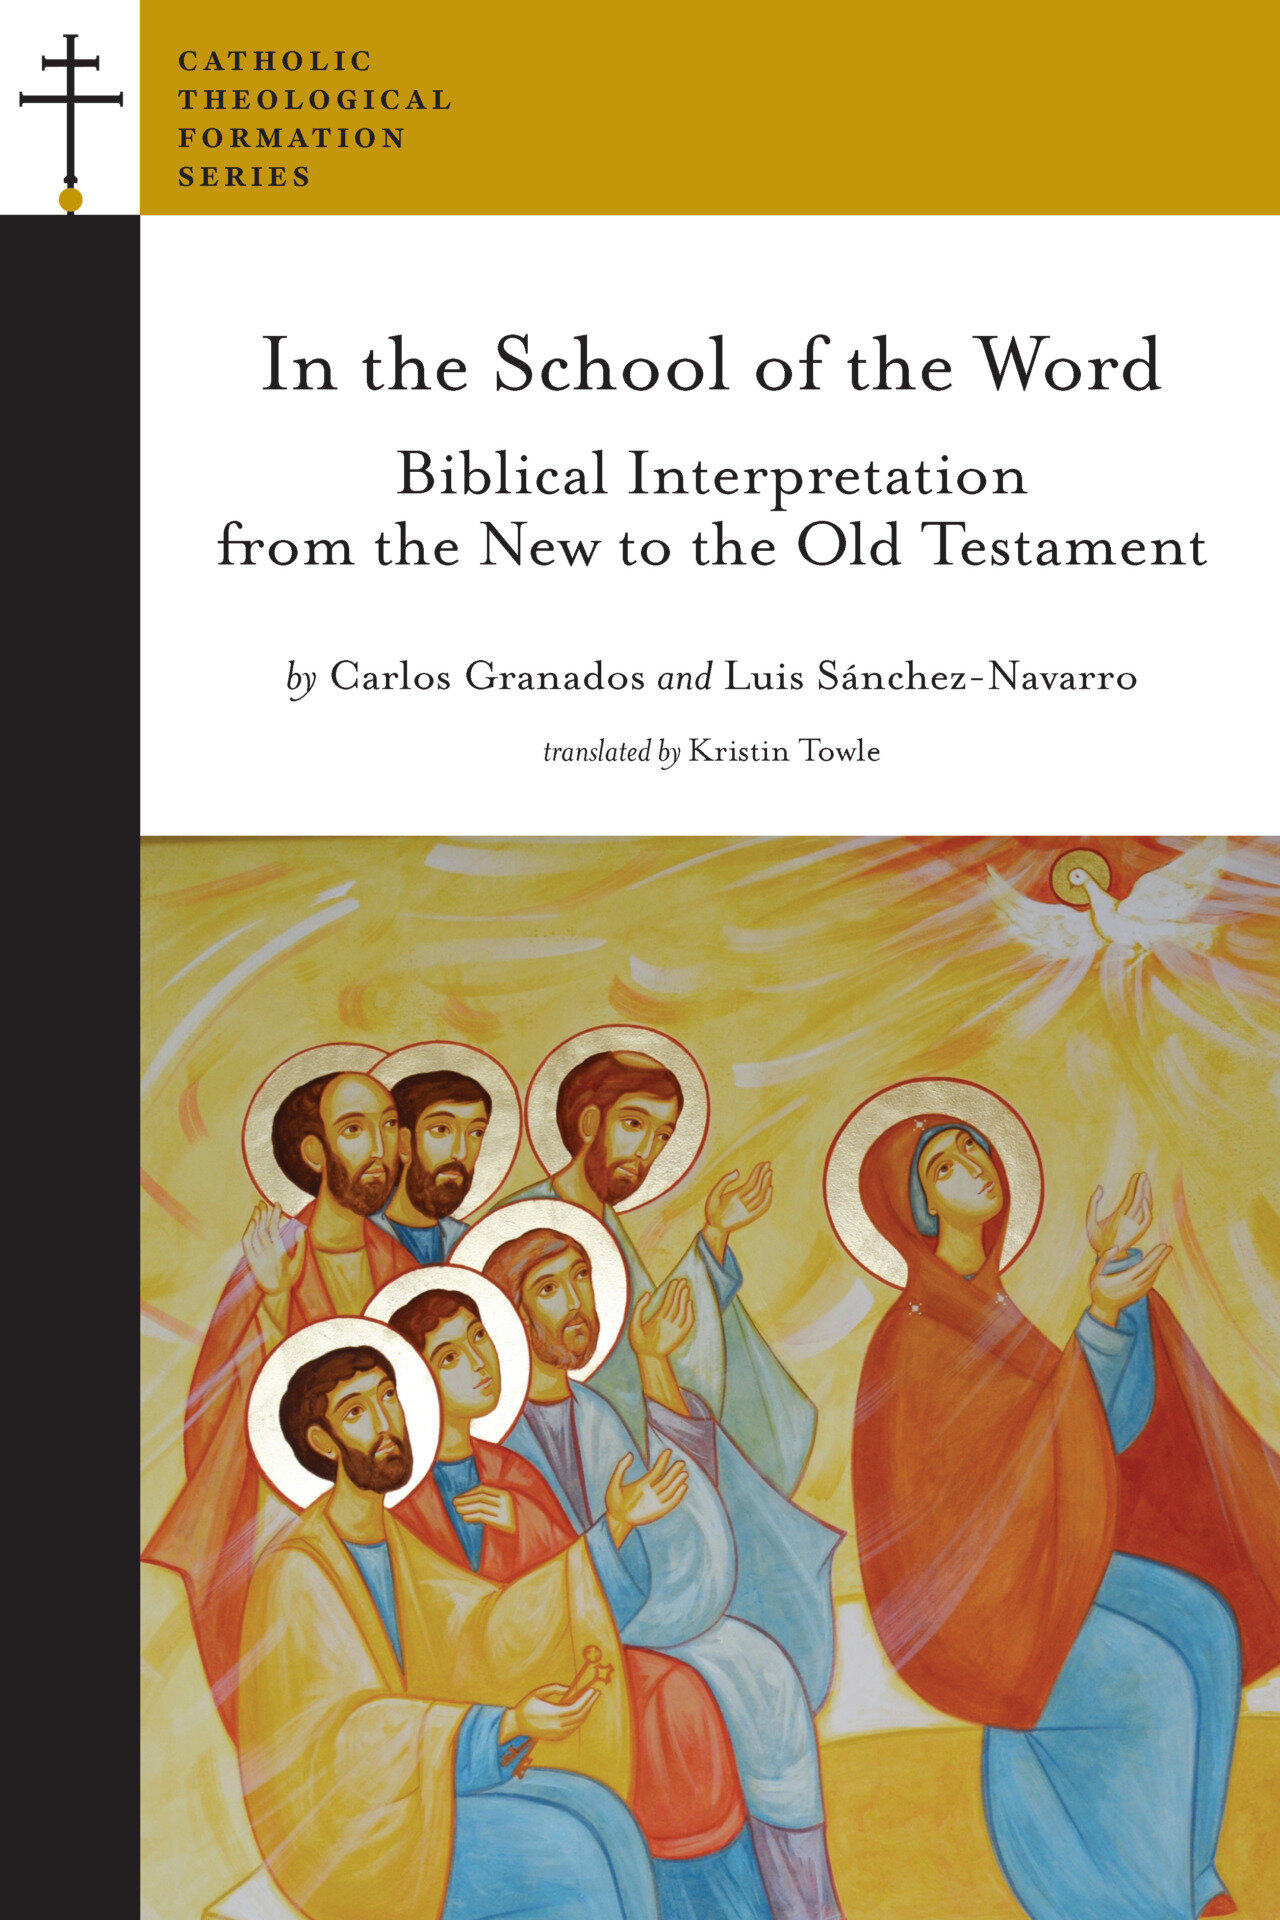 In the School of the Word: Biblical Interpretation from the New to the Old Testament (Catholic Theological Formation Series)